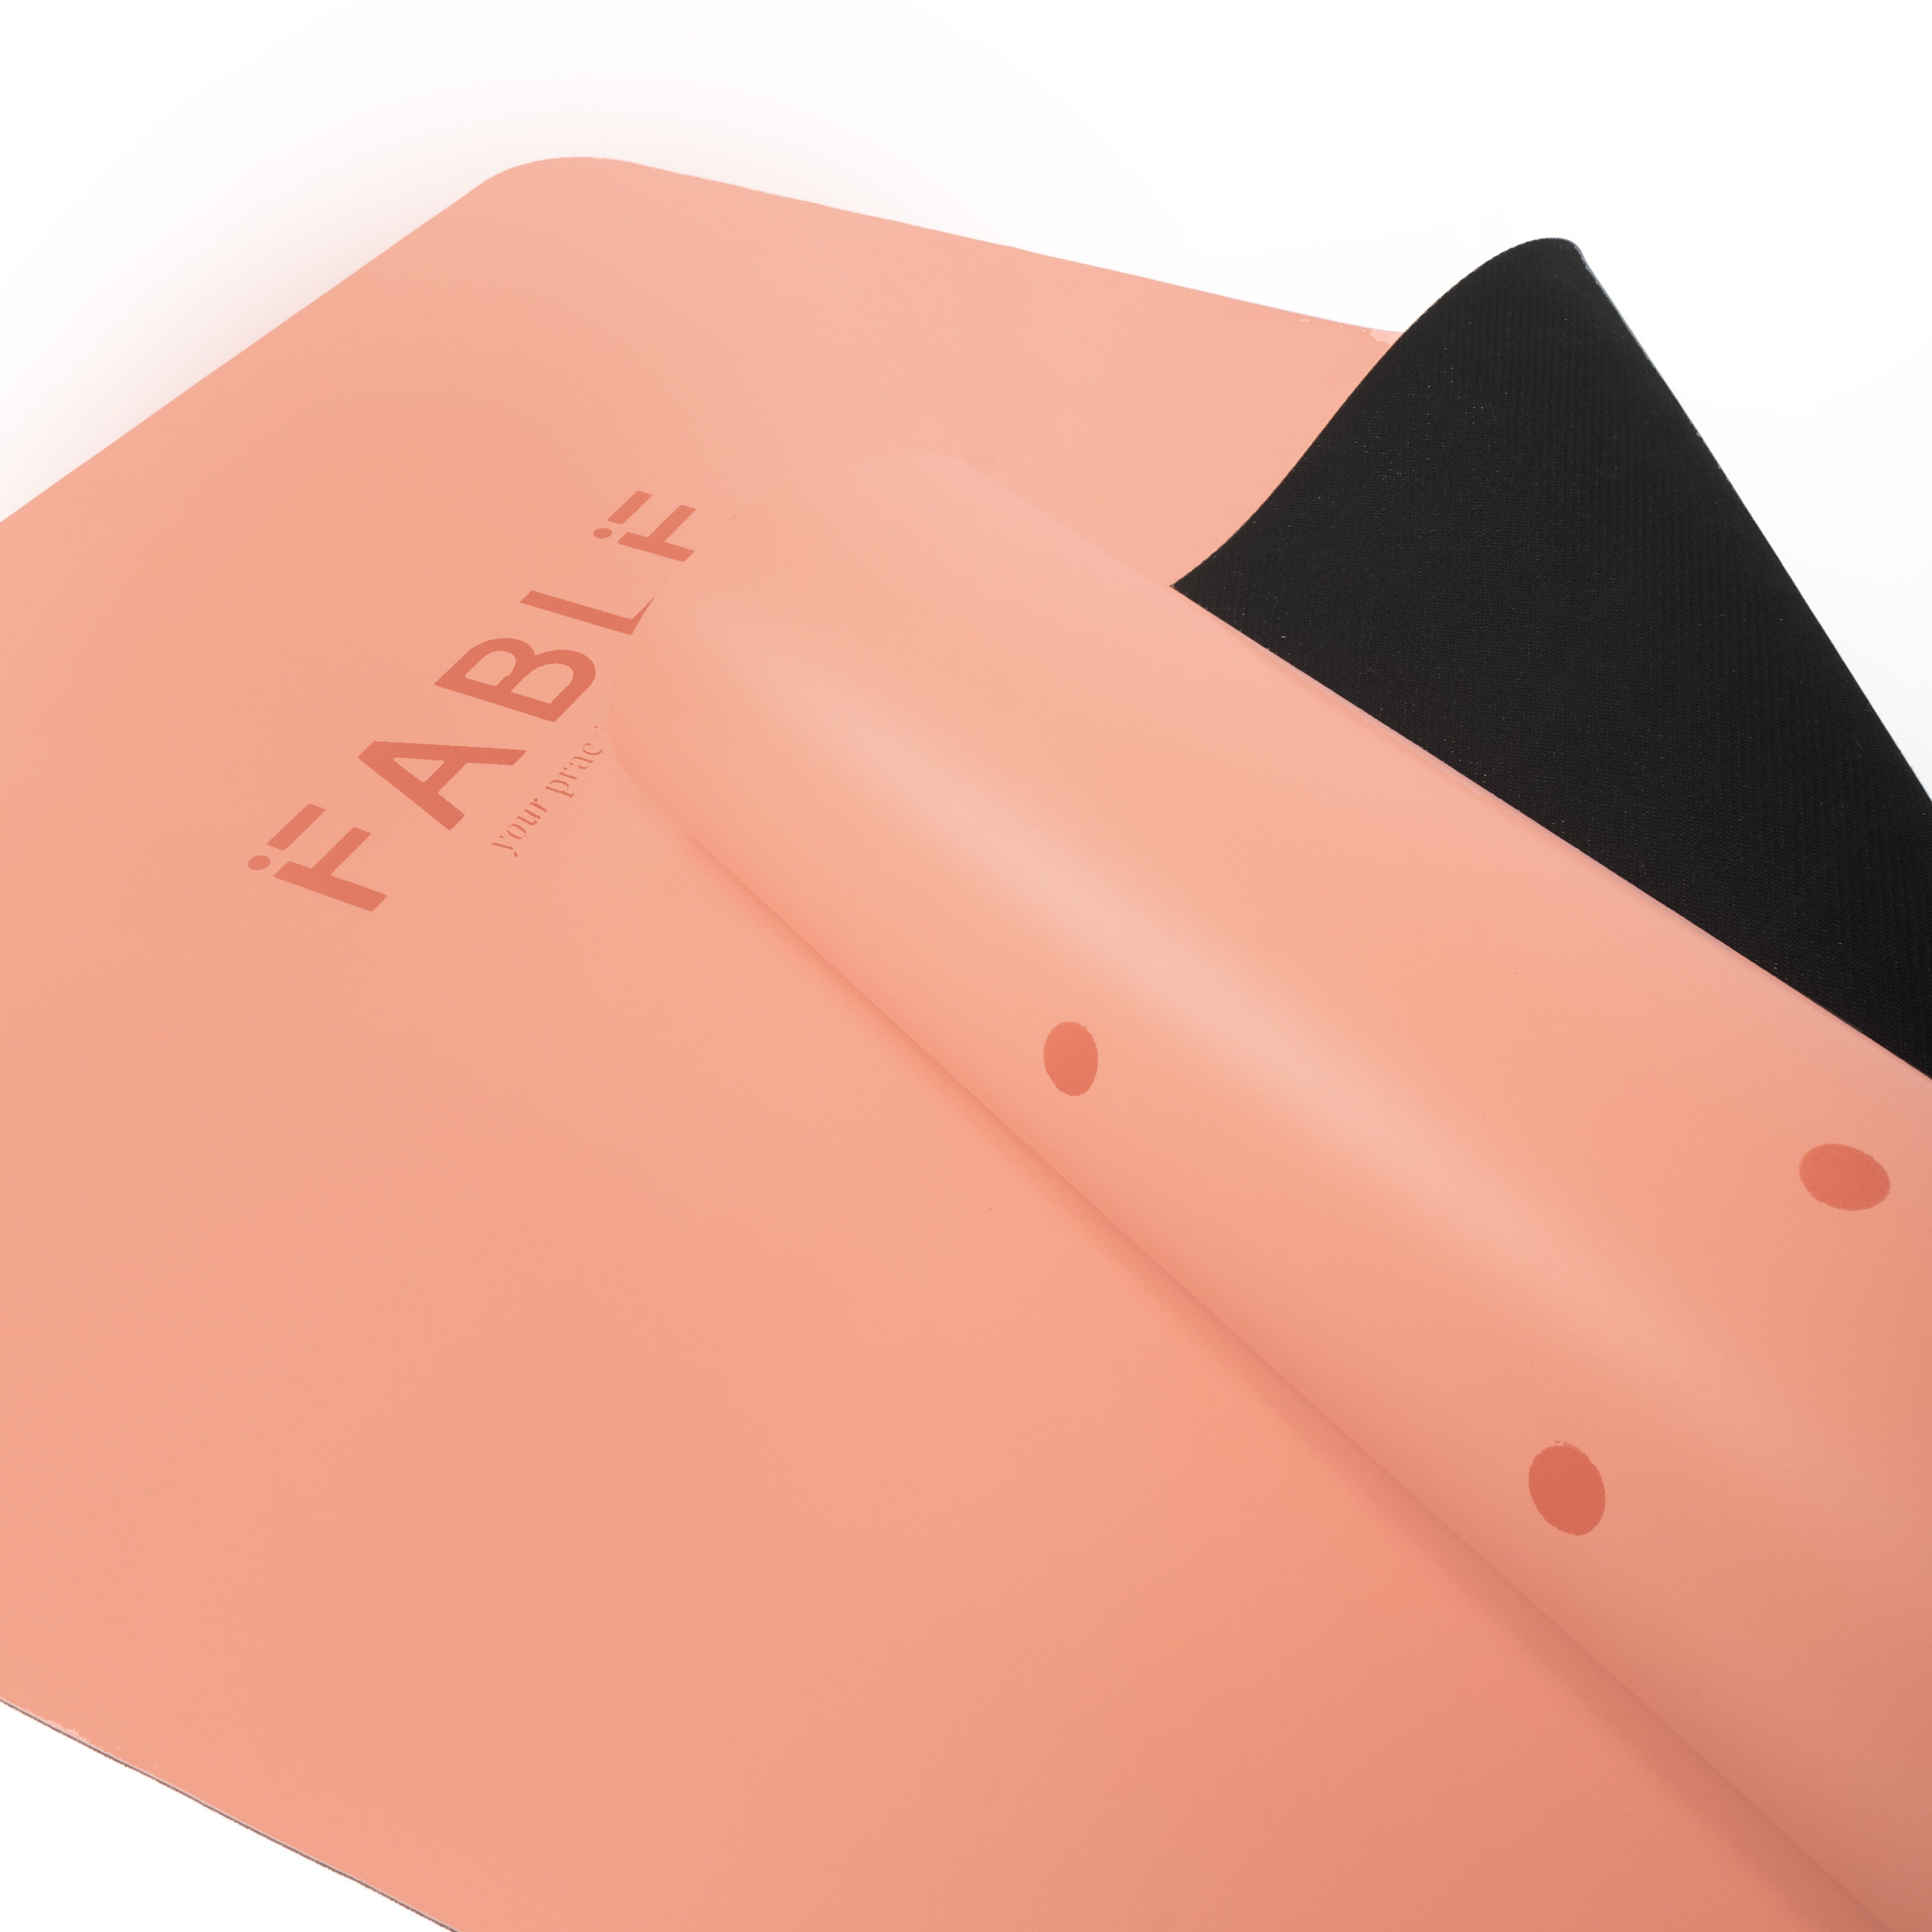 Blush Pink Yoga Mat from Fable Yoga Close Up - 4mm Pro Grip